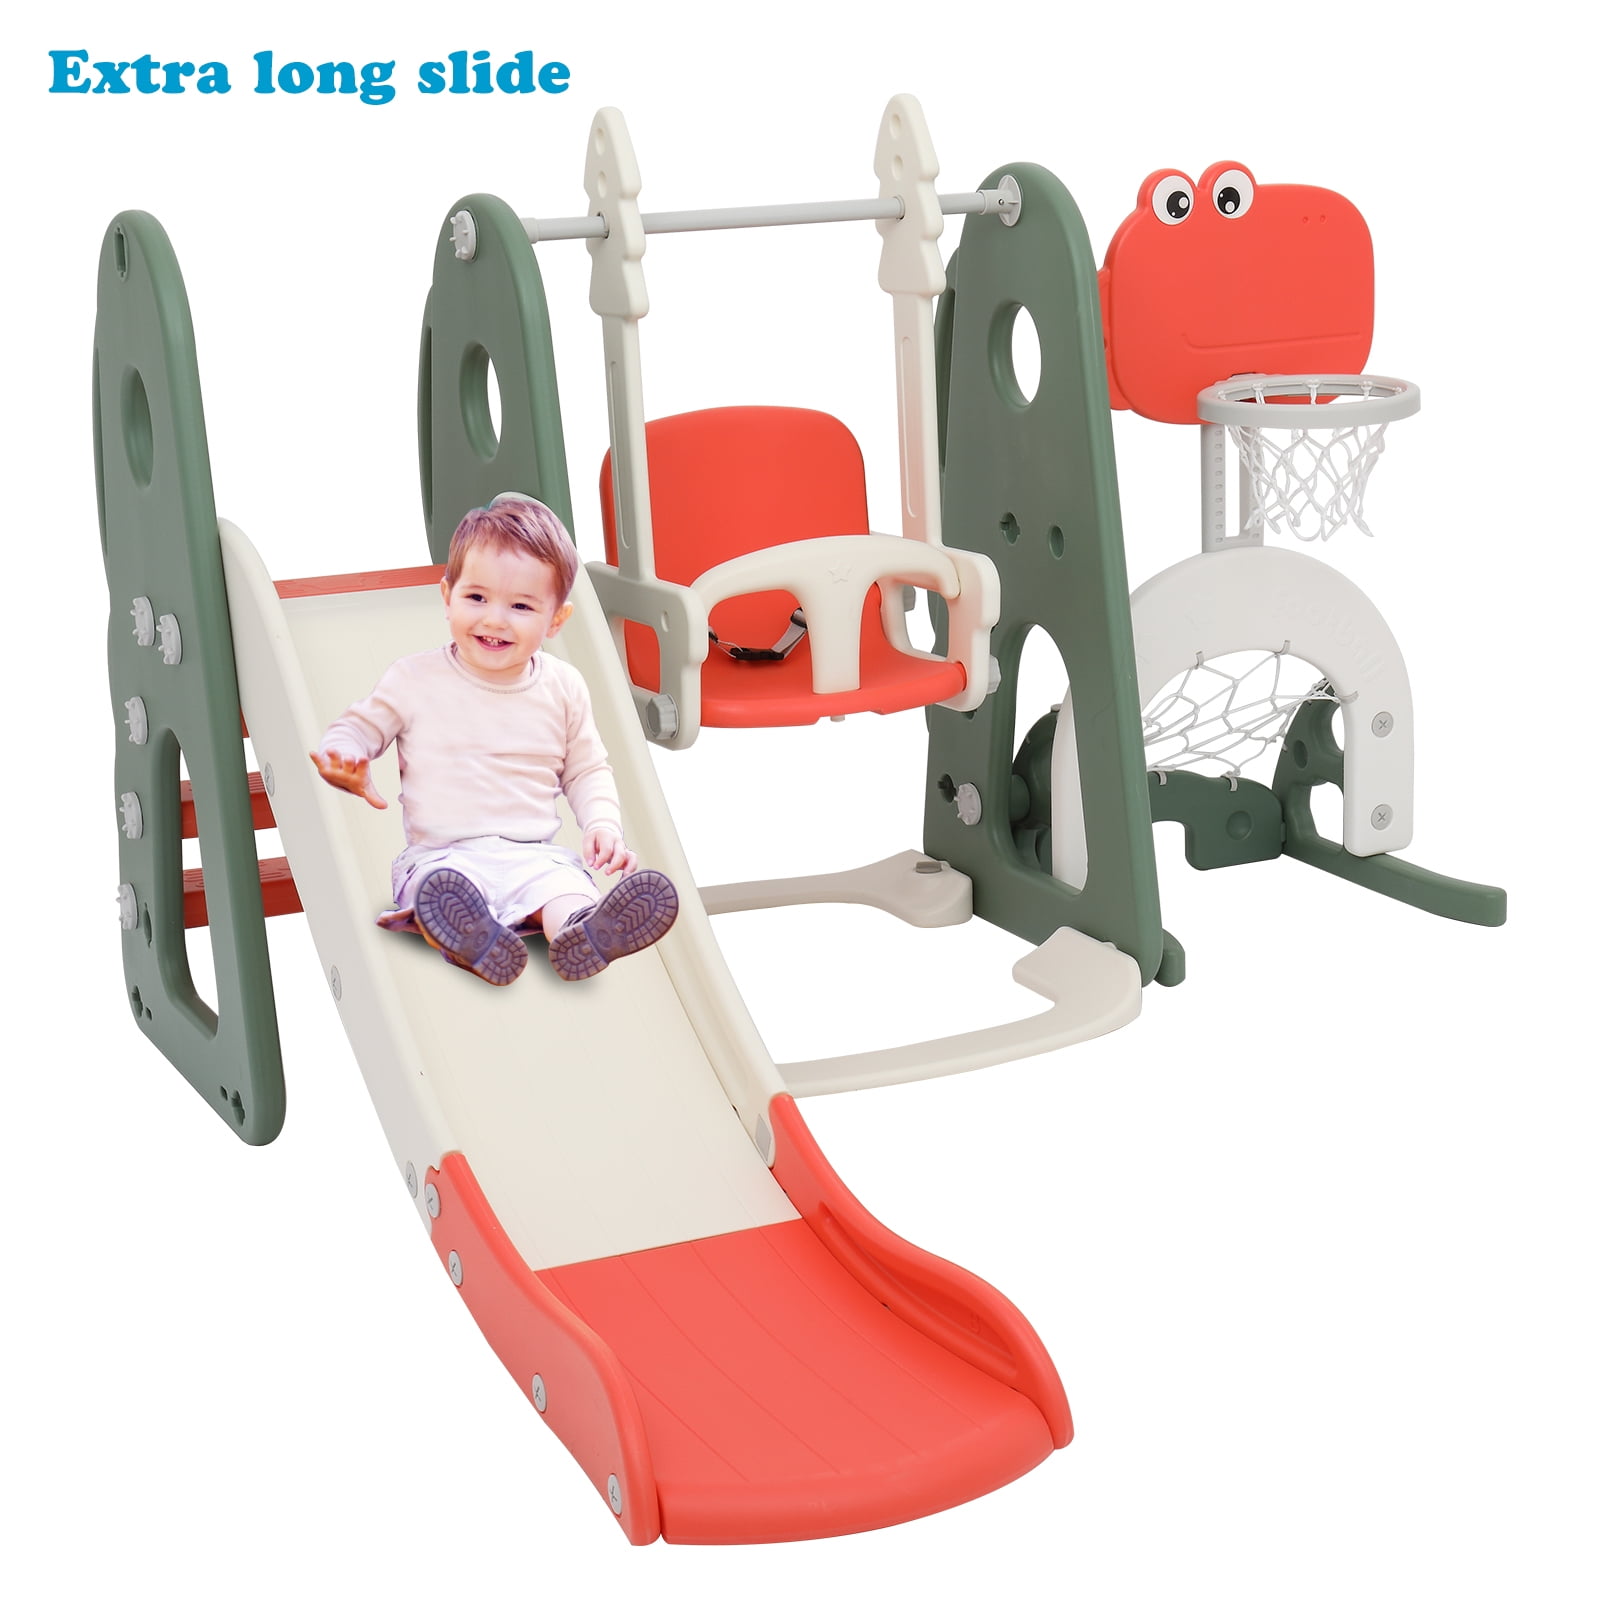 Details about   5 in 1 Toddler Indoor Outdoor Playground Climber Stairs Swing Slide Playset Set 